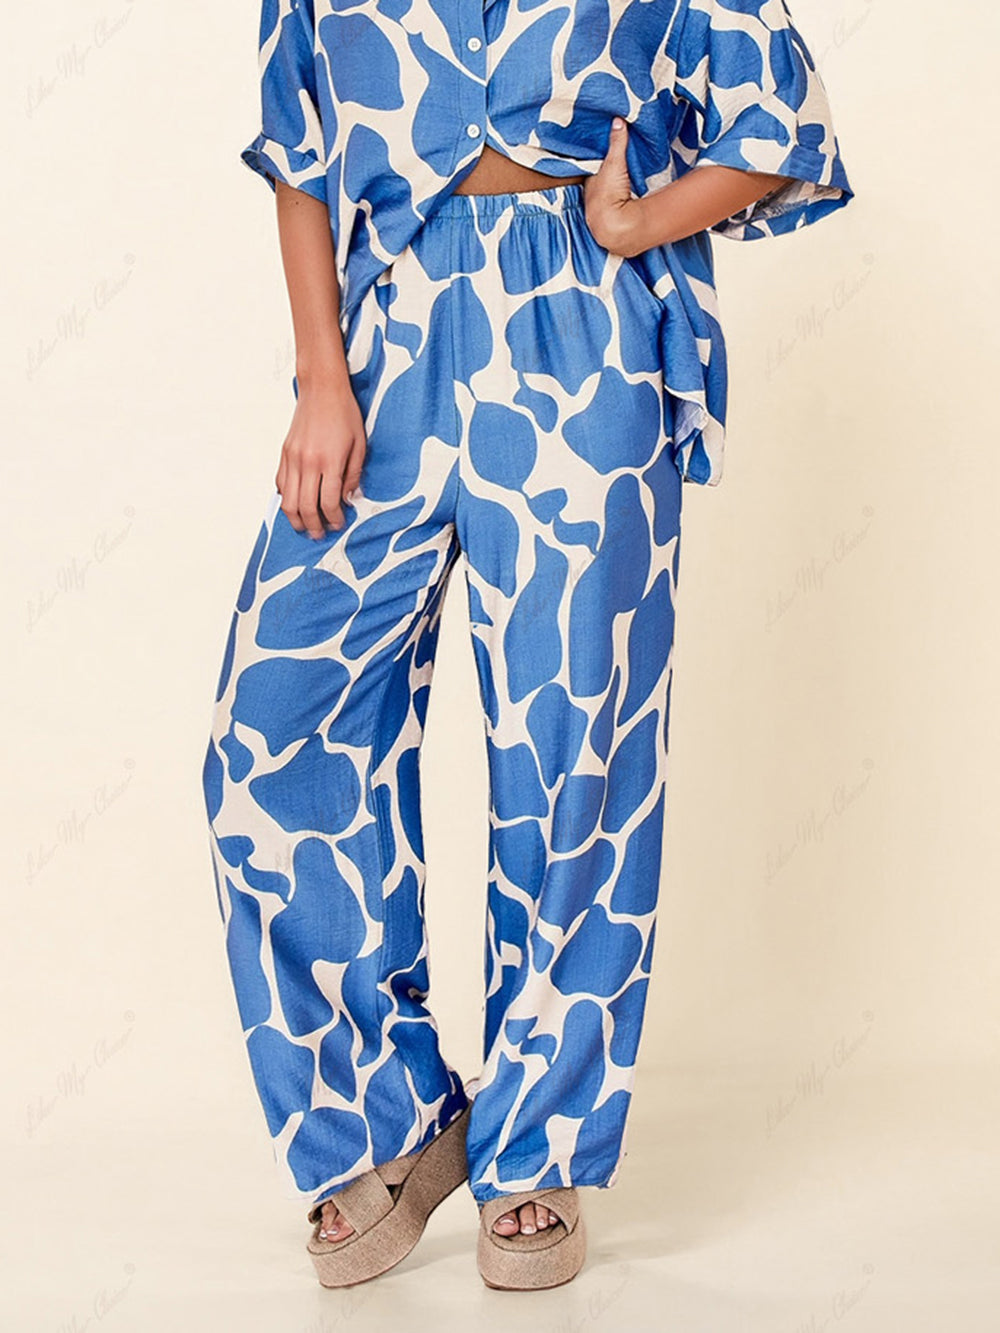 Striped Patterned Blue And White Printed Baggy Pants